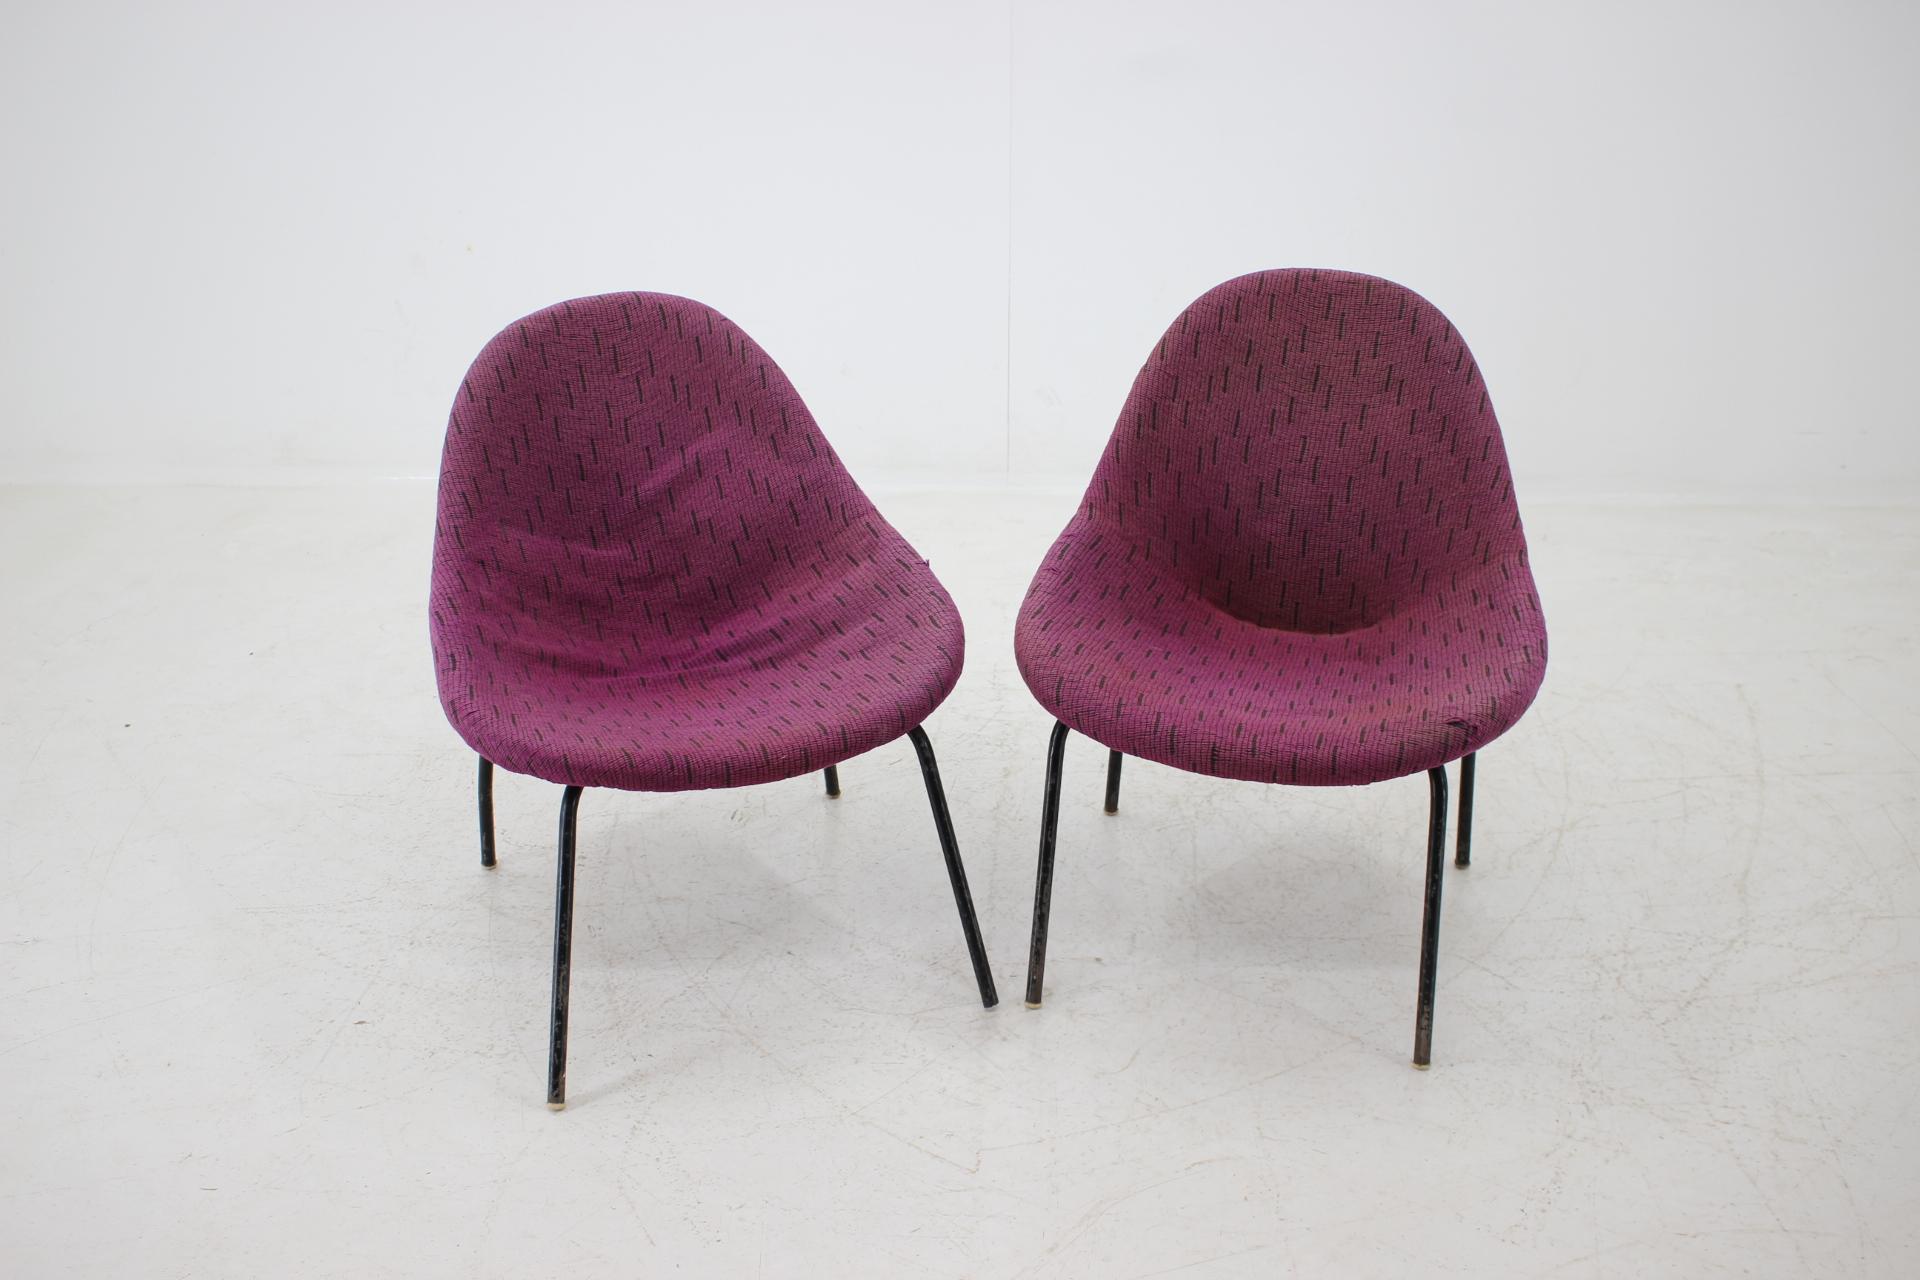 - Made in Czechoslovakia
- Made of metal, fabric
- Chairs has some signs use
- Original condition.